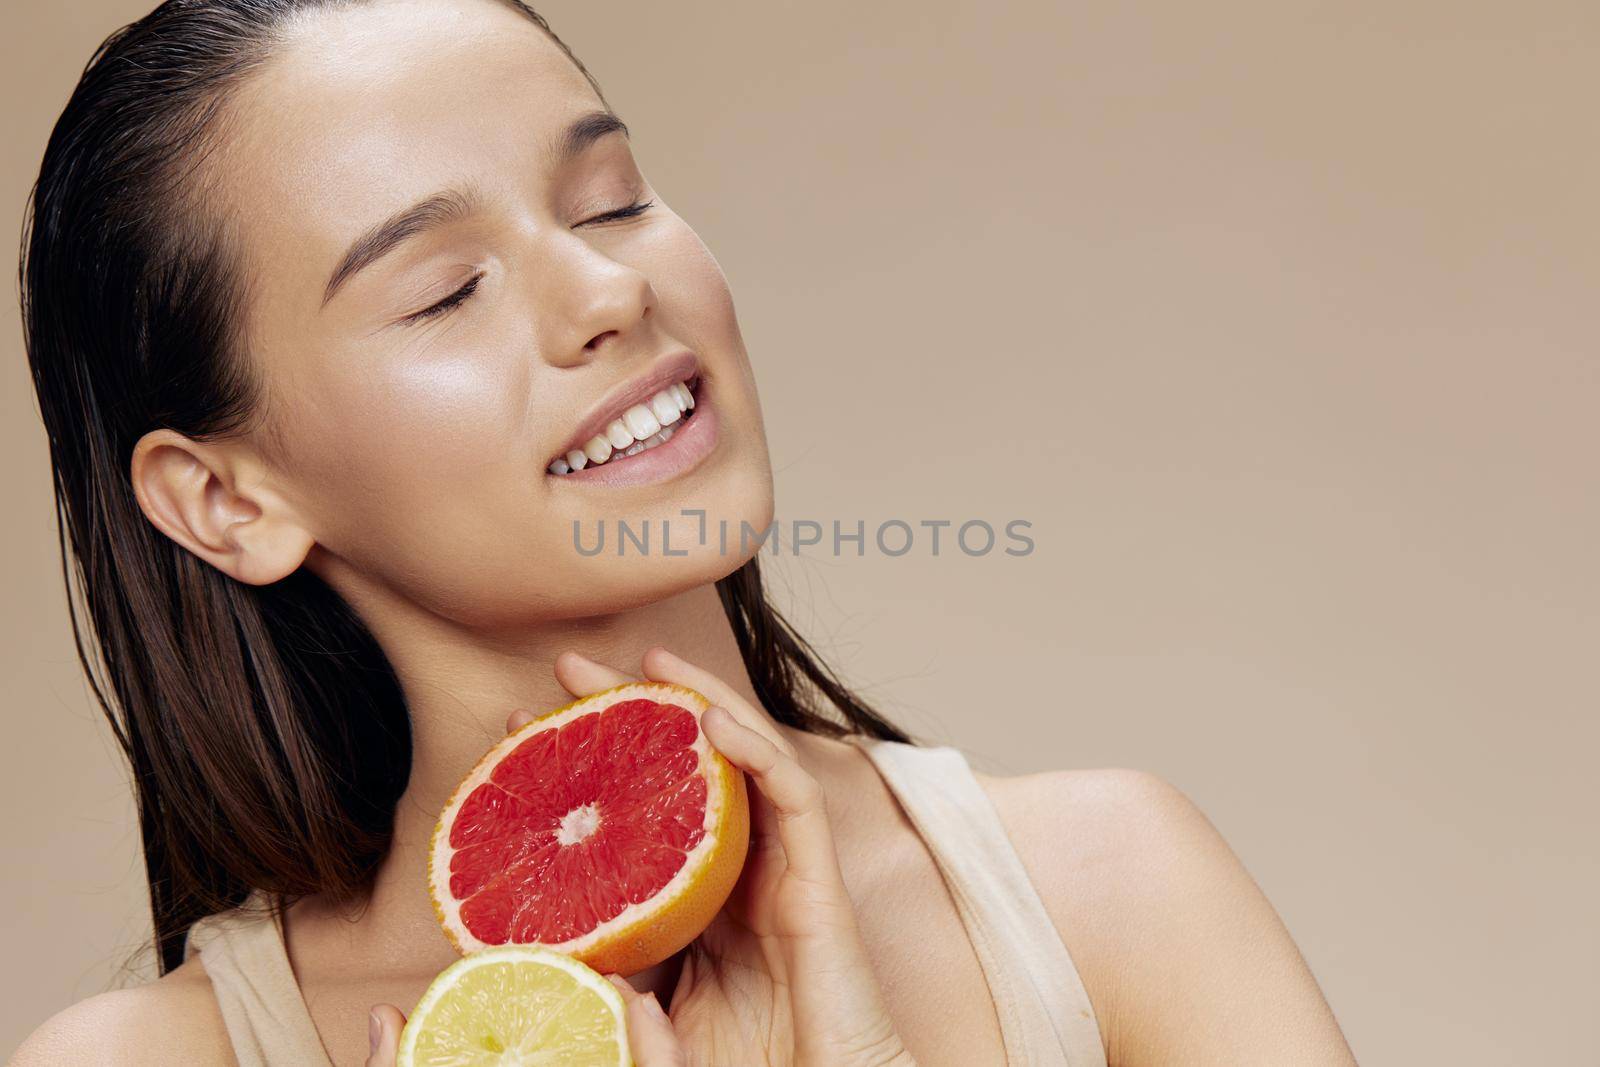 brunette grapefruit near face clean skin care health isolated background. High quality photo